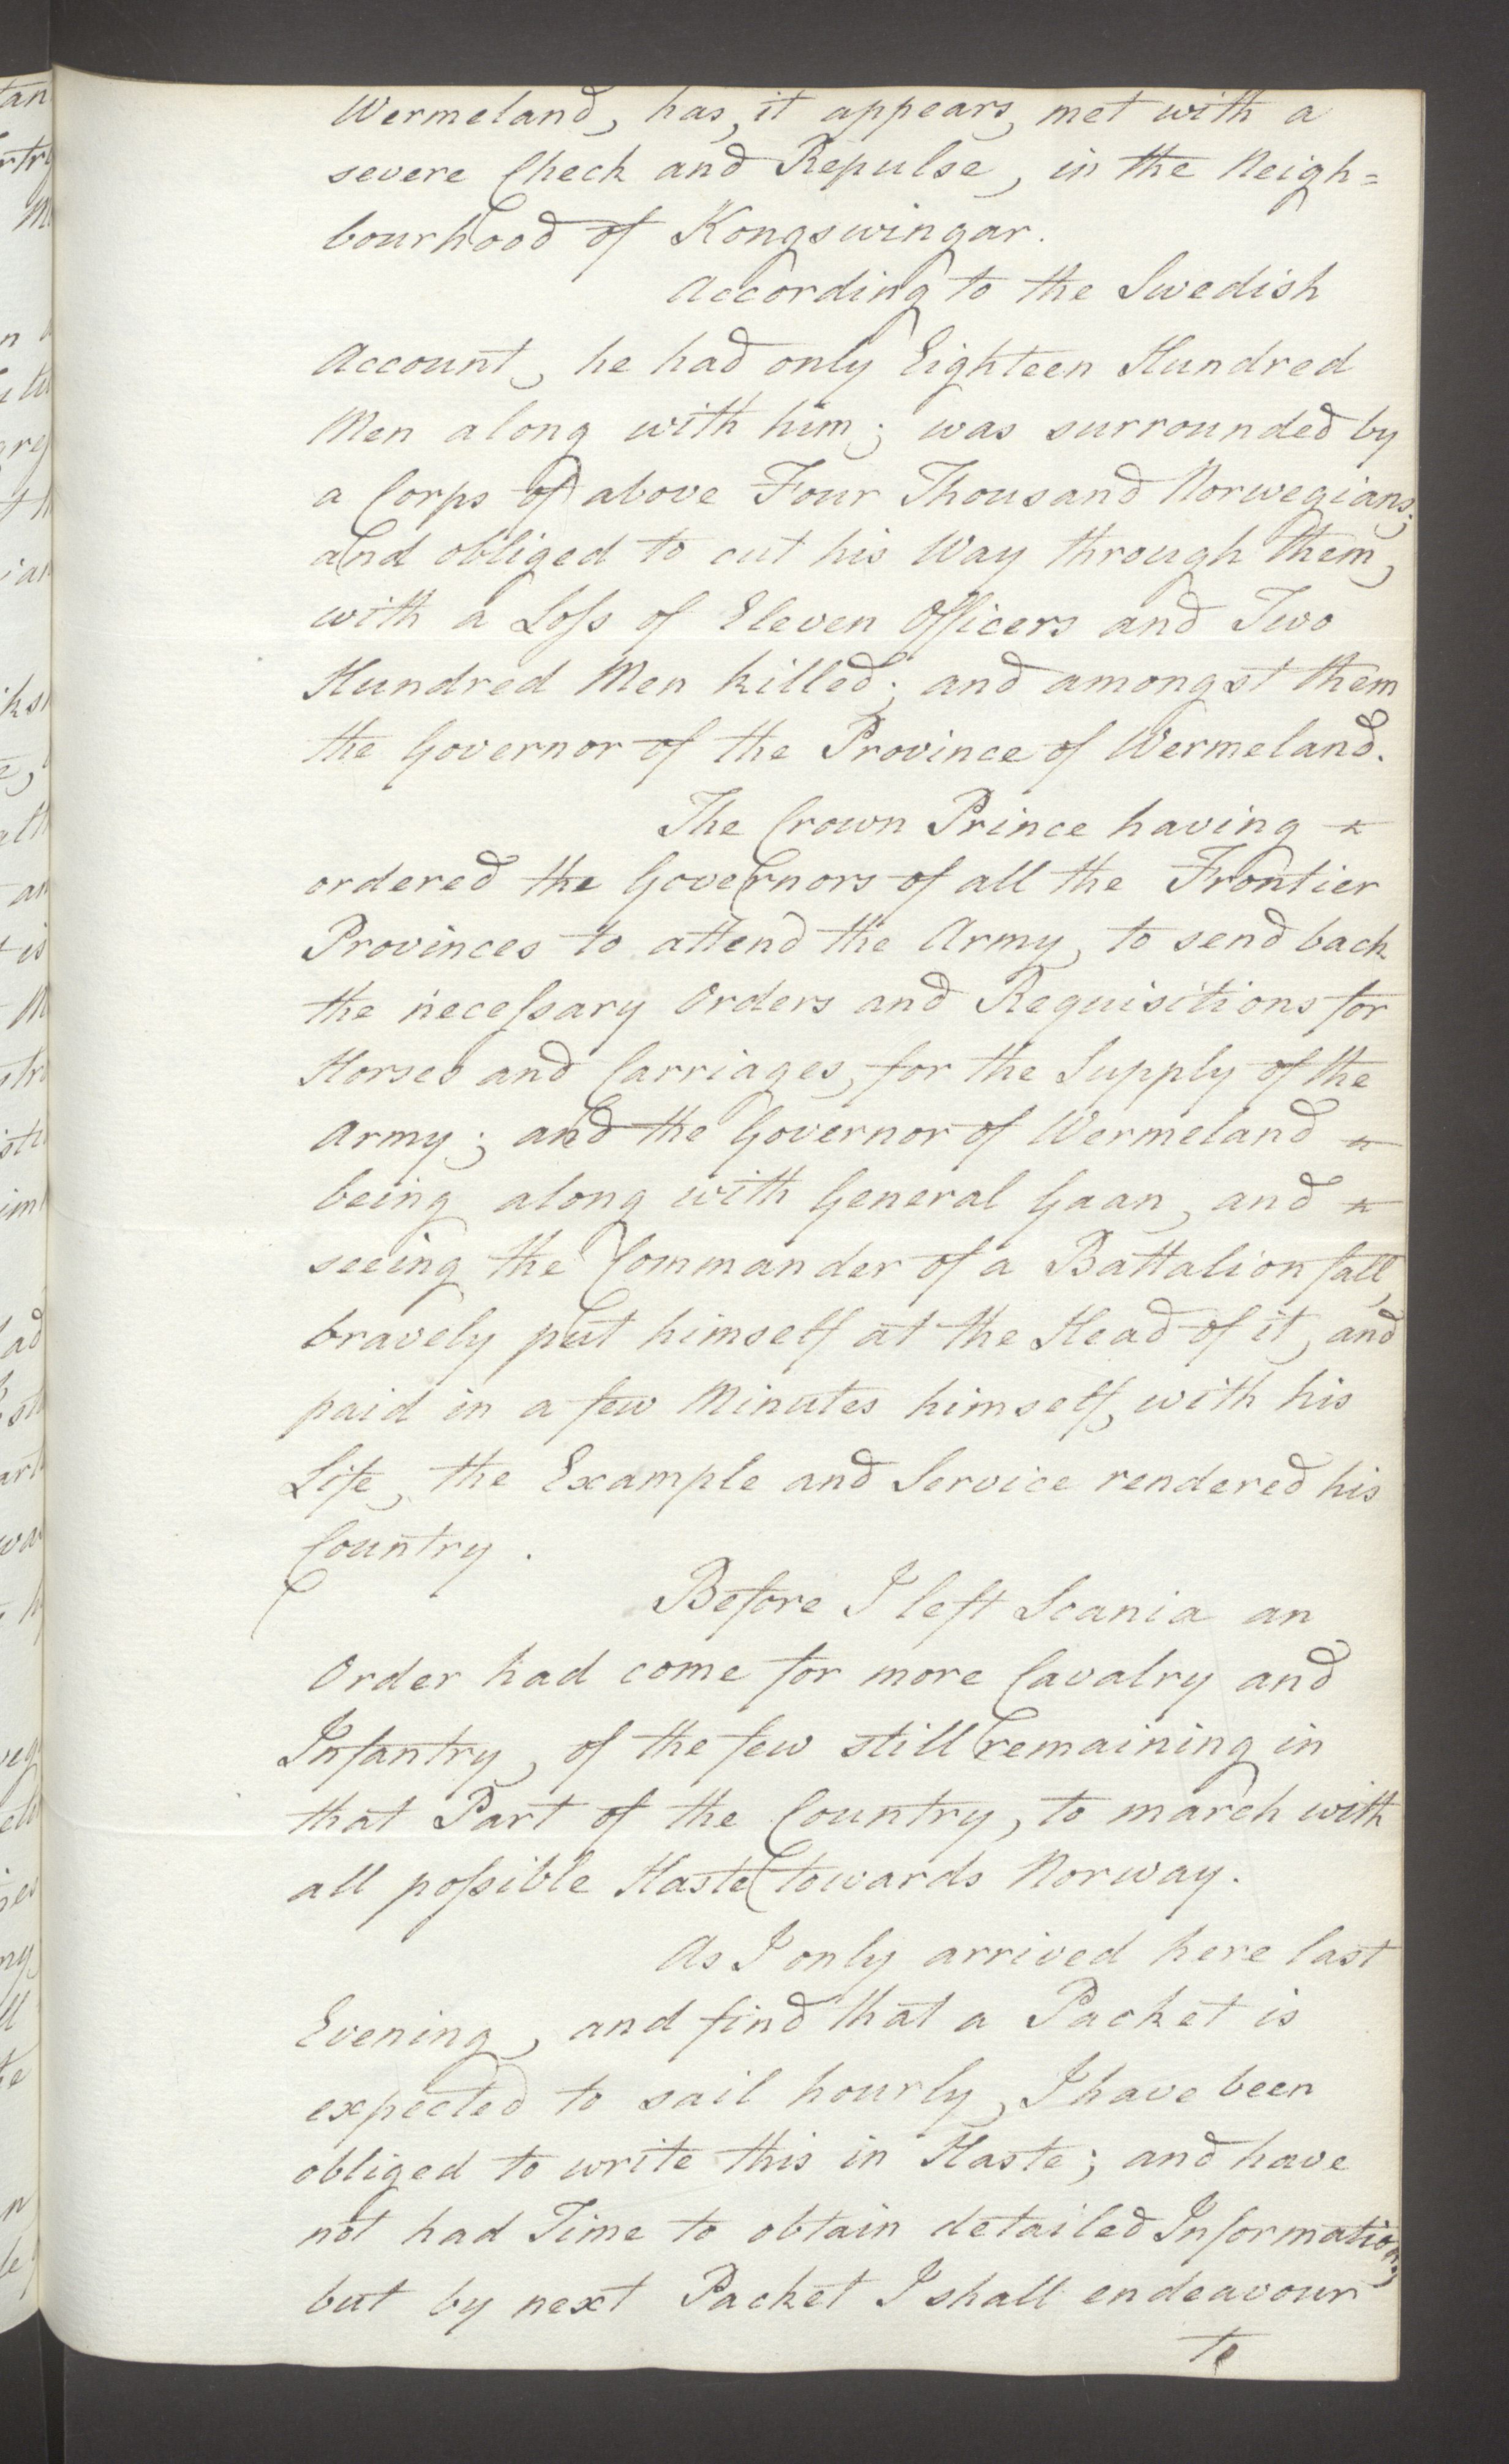 Foreign Office*, UKA/-/FO 38/16: Sir C. Gordon. Reports from Malmö, Jonkoping, and Helsingborg, 1814, p. 81